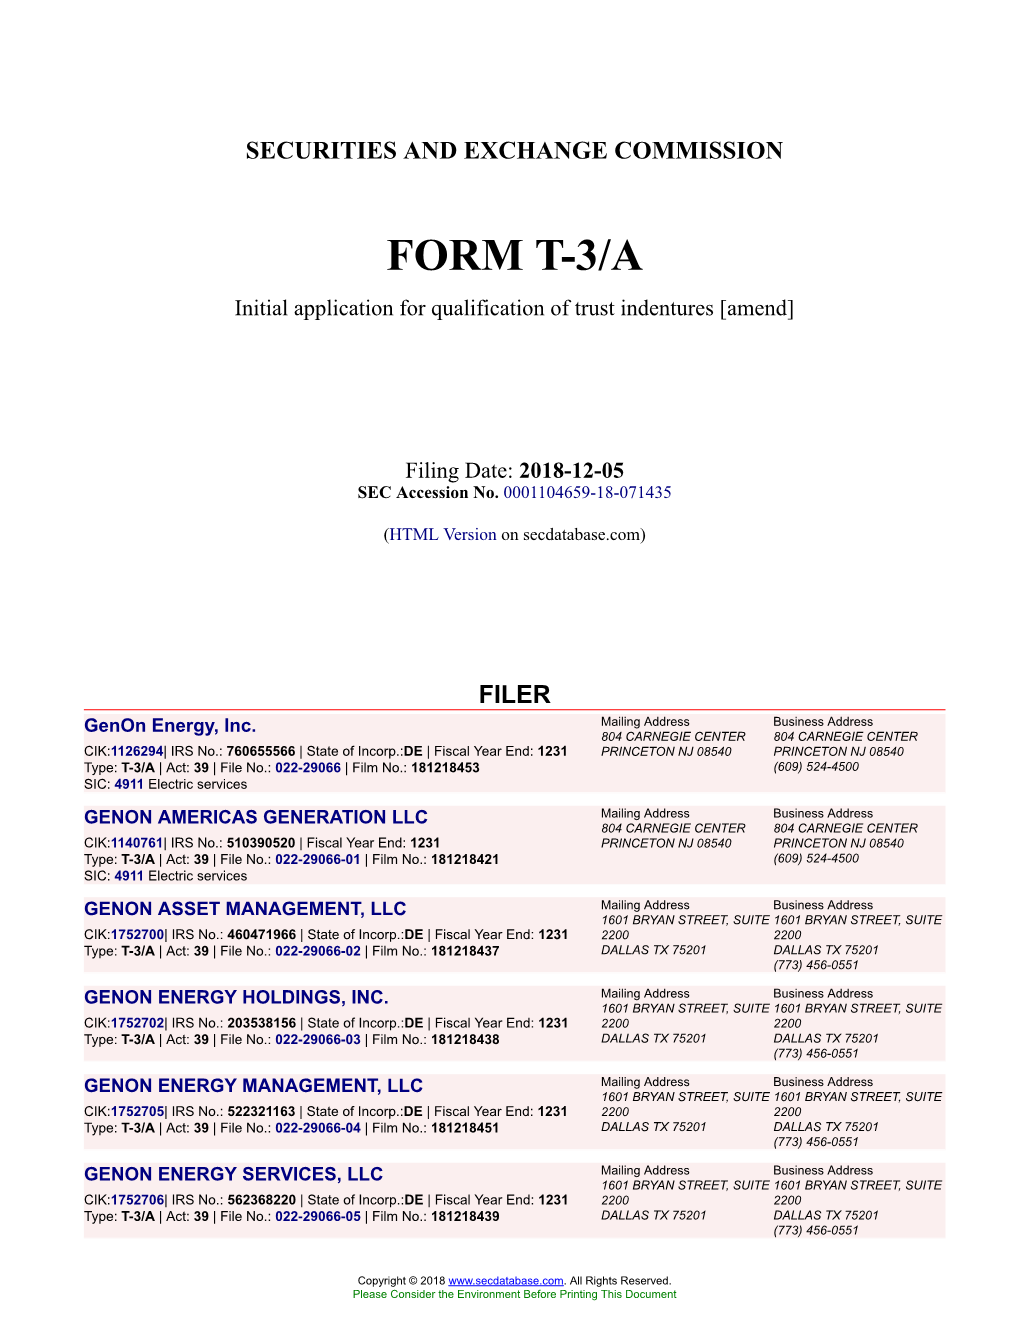 Genon Energy, Inc. Form T-3/A Filed 2018-12-05